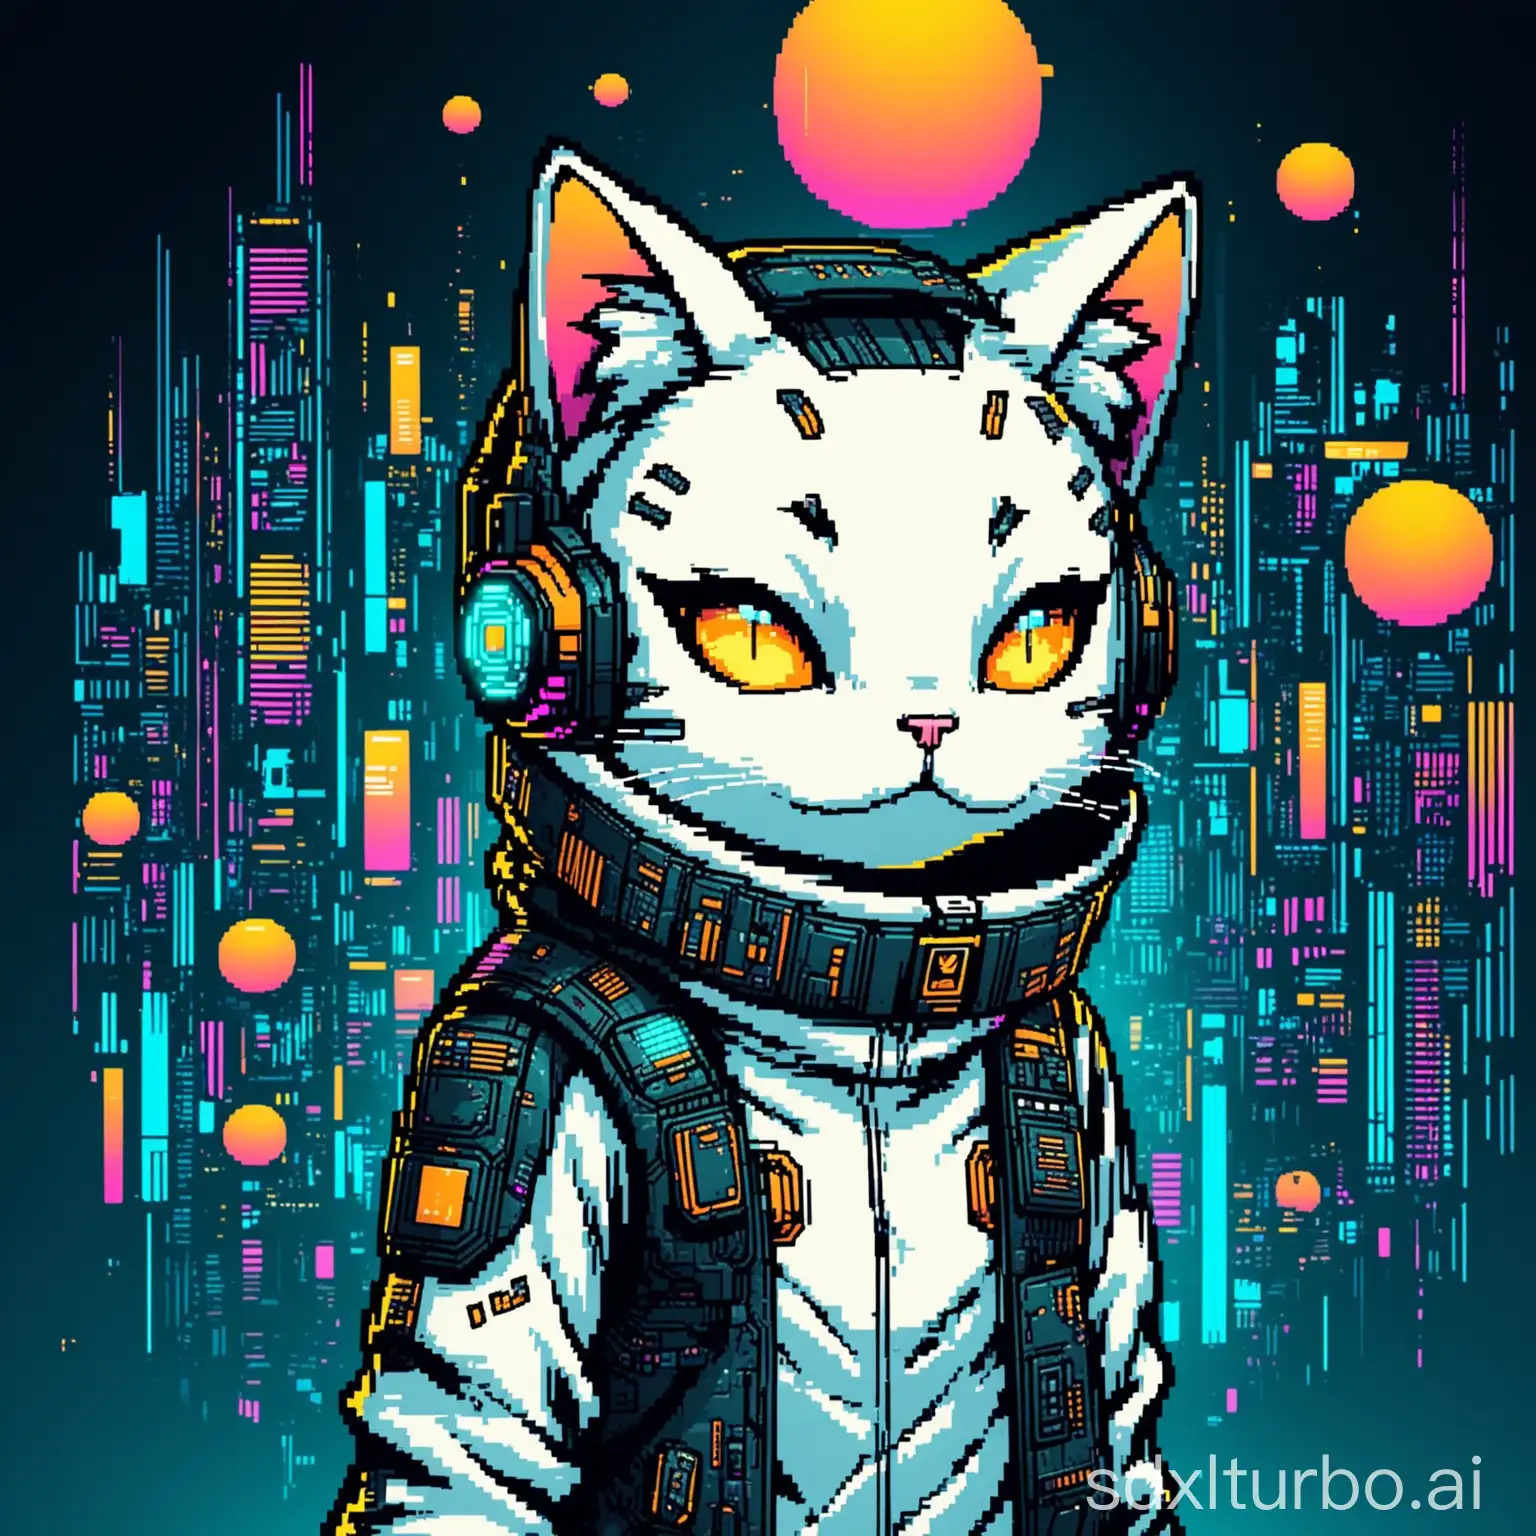 I want to generate a cyberpunk, cool cat. Hope for a bit of a cartoon style, but the style is balanced and not too exaggerated. Its identity is a programmer, with a white body and some patterns.